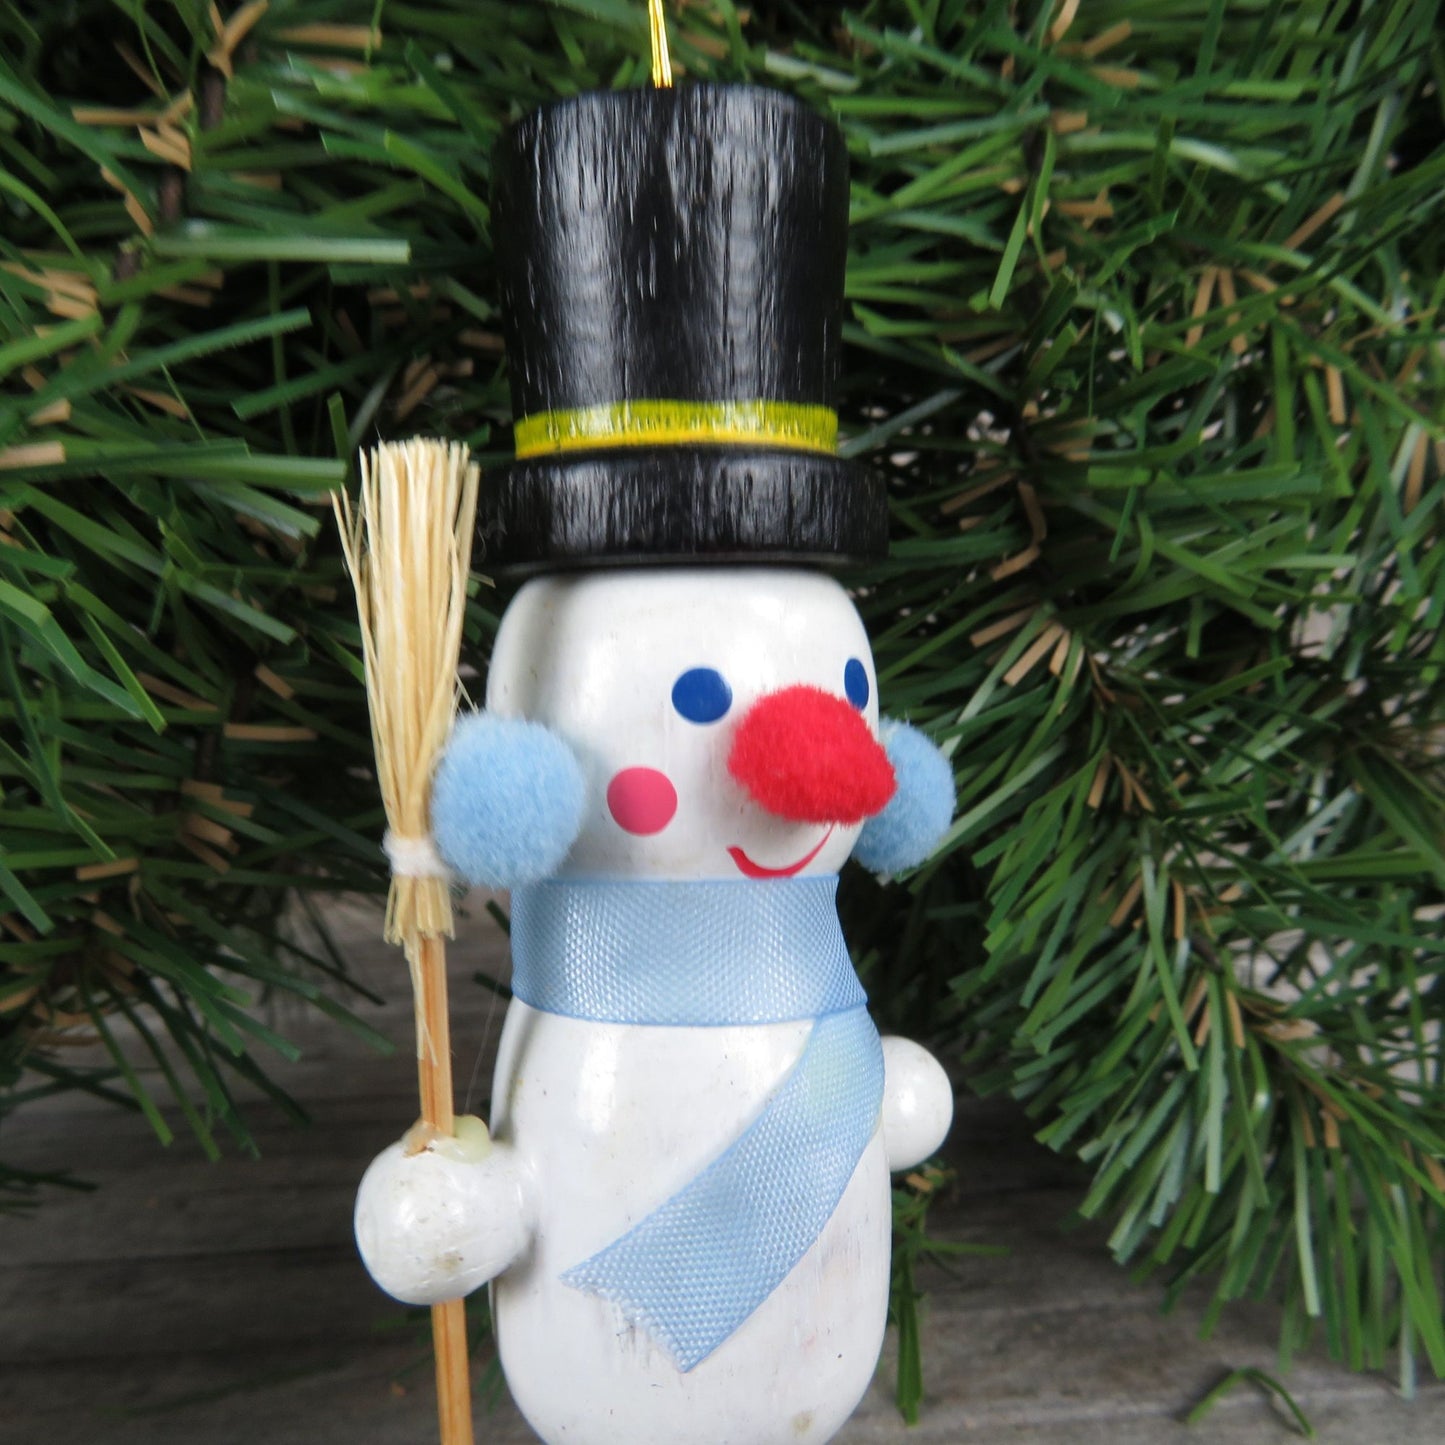 Vintage Snowman Wood Ornament Broom Top Hat Blue Scarf Ear Muffs Wooden Christmas